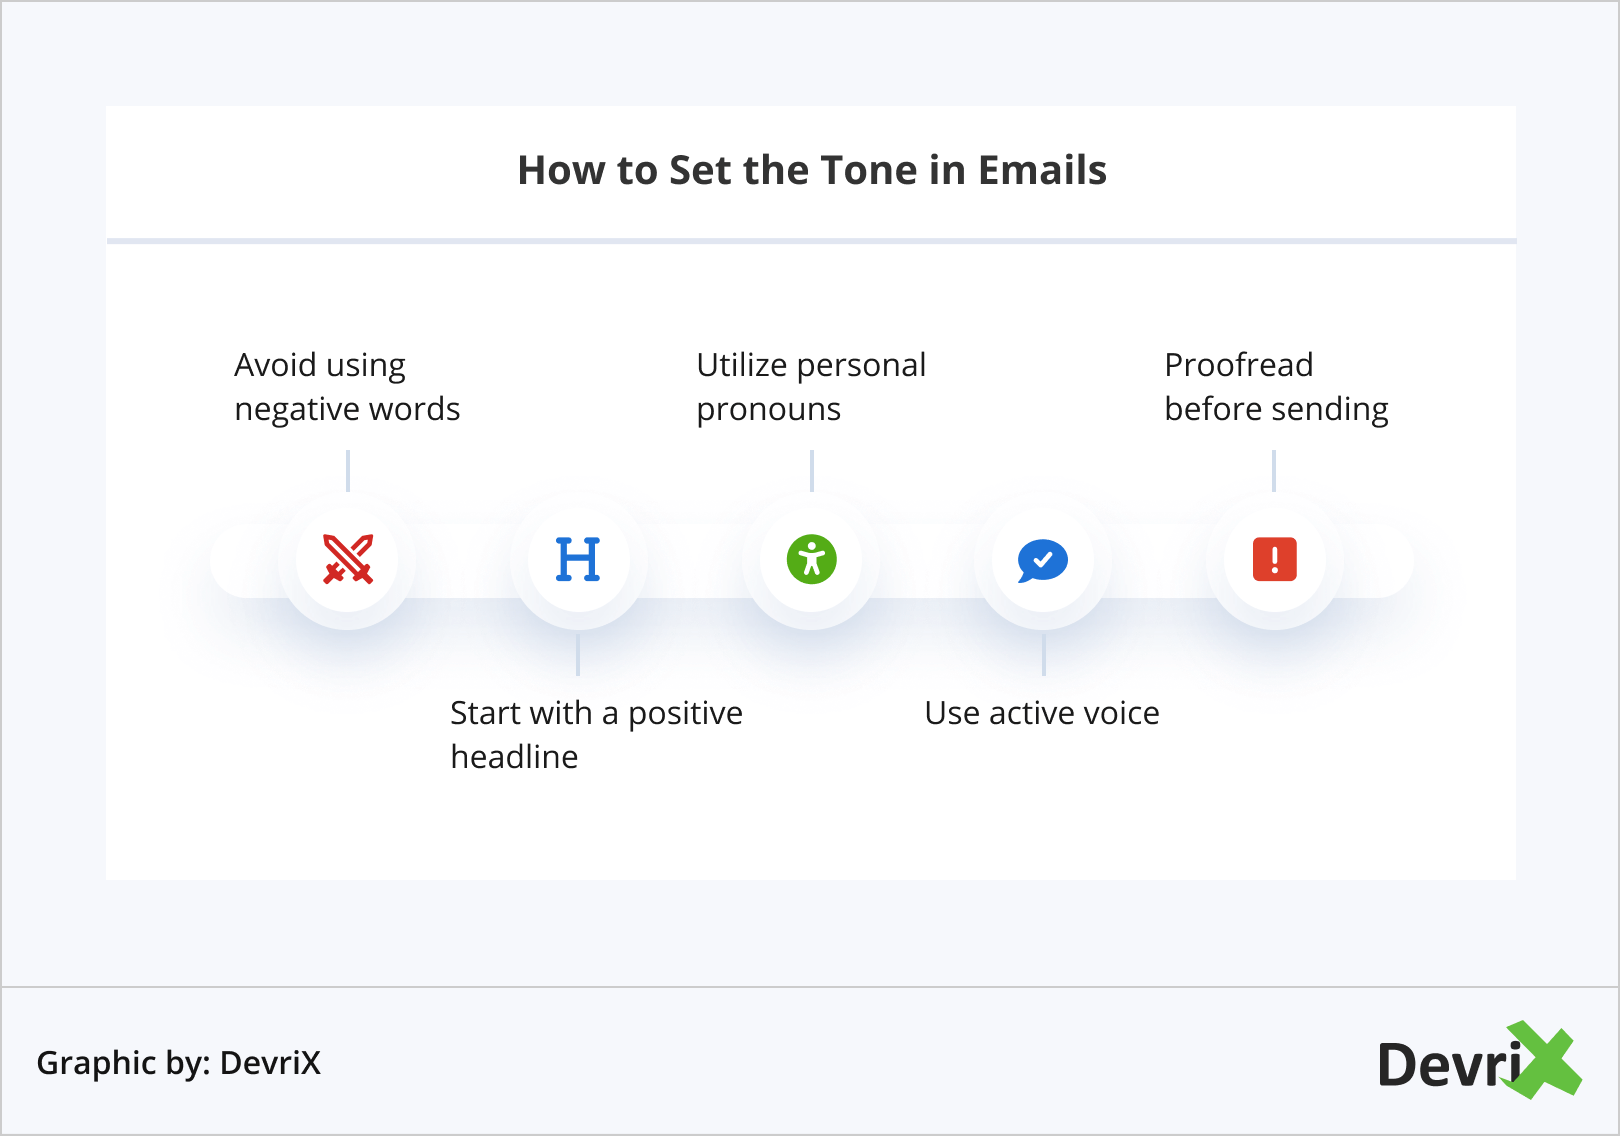 How to Set the Tone in Emails